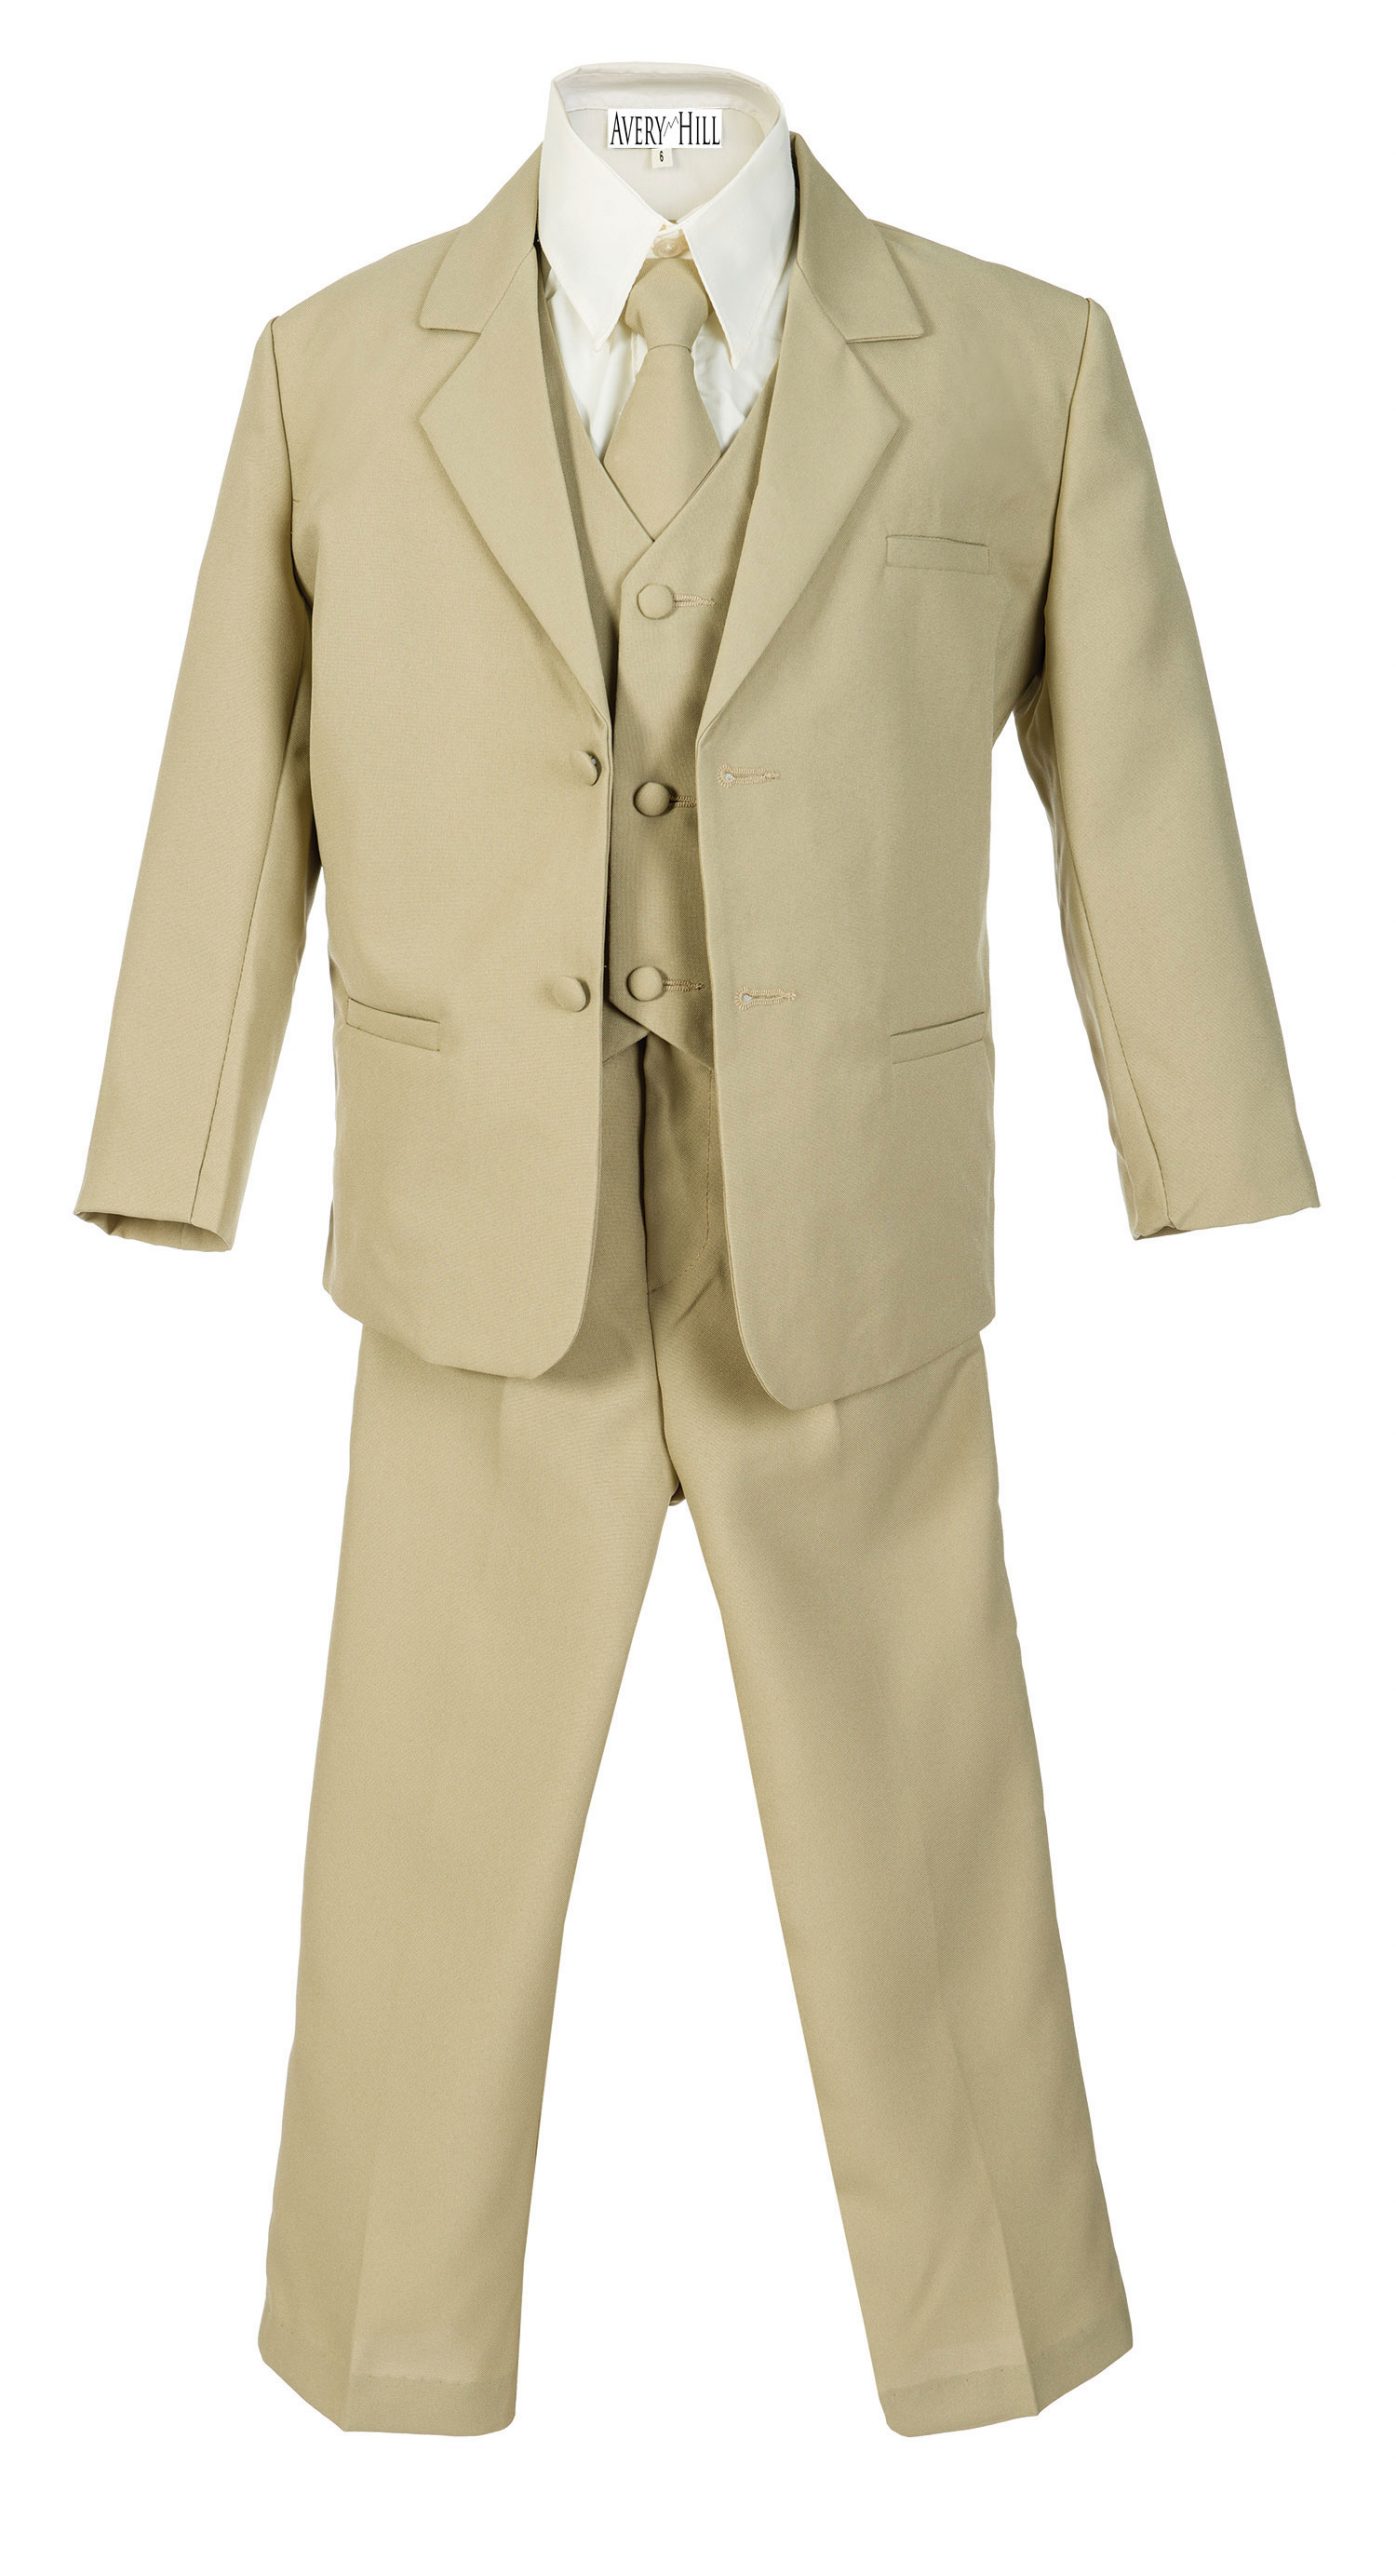 Avery Hill Boys Formal 5 Piece Suit with Shirt and Vest Khaki - 20